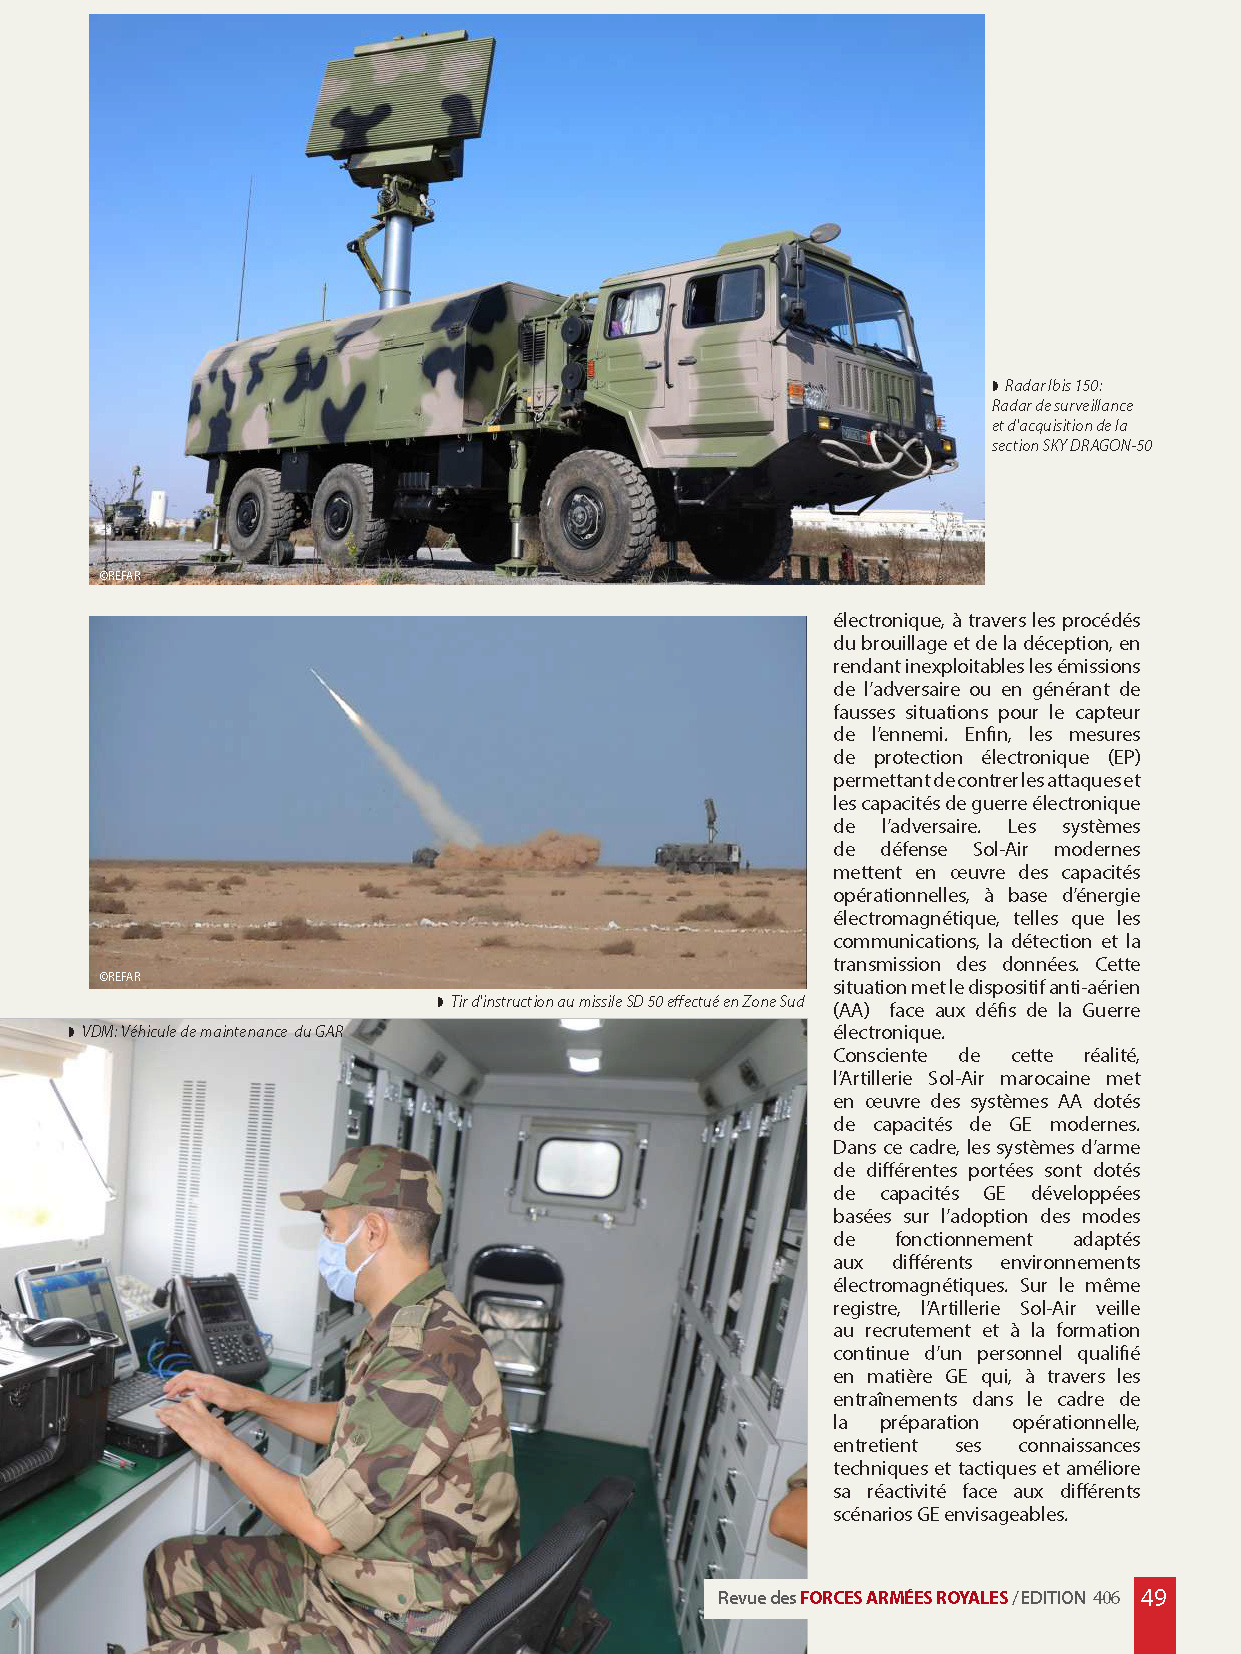 Sky Dragon 50 GAS2 Medium-Range Surface-to-Air defense missile Pages_23